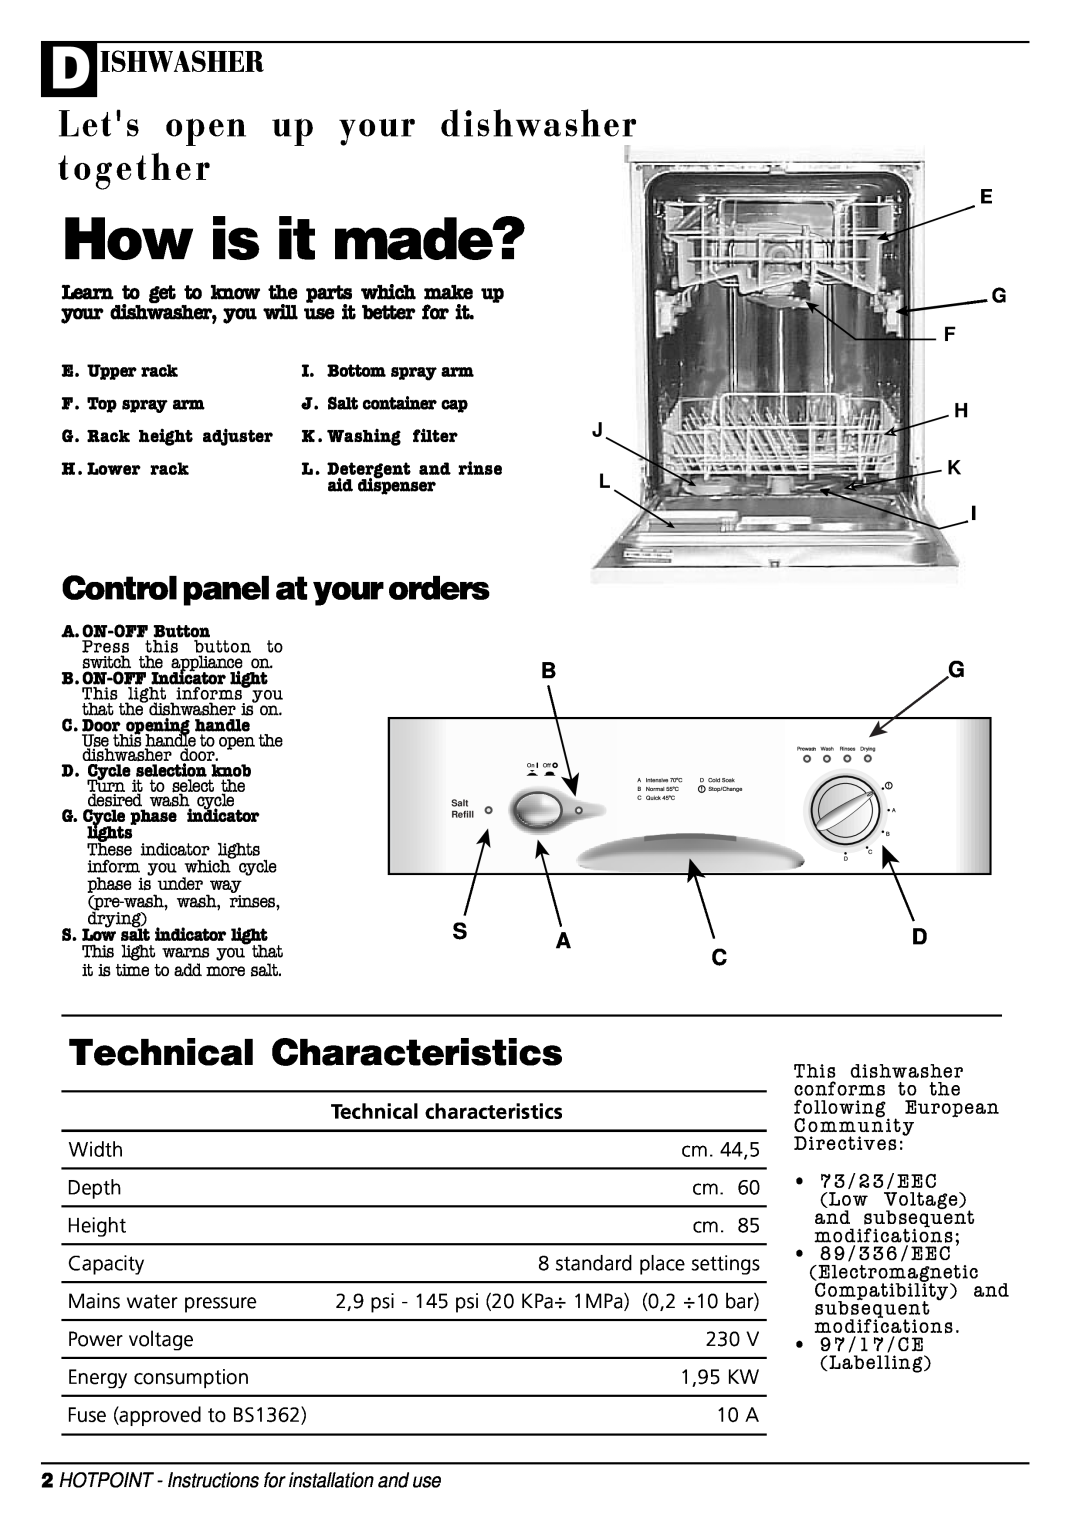 Hotpoint D C 27 How is it made?, Lets open up your dishwasher together, Technical Characteristics, S Ad C, D Ishwasher 